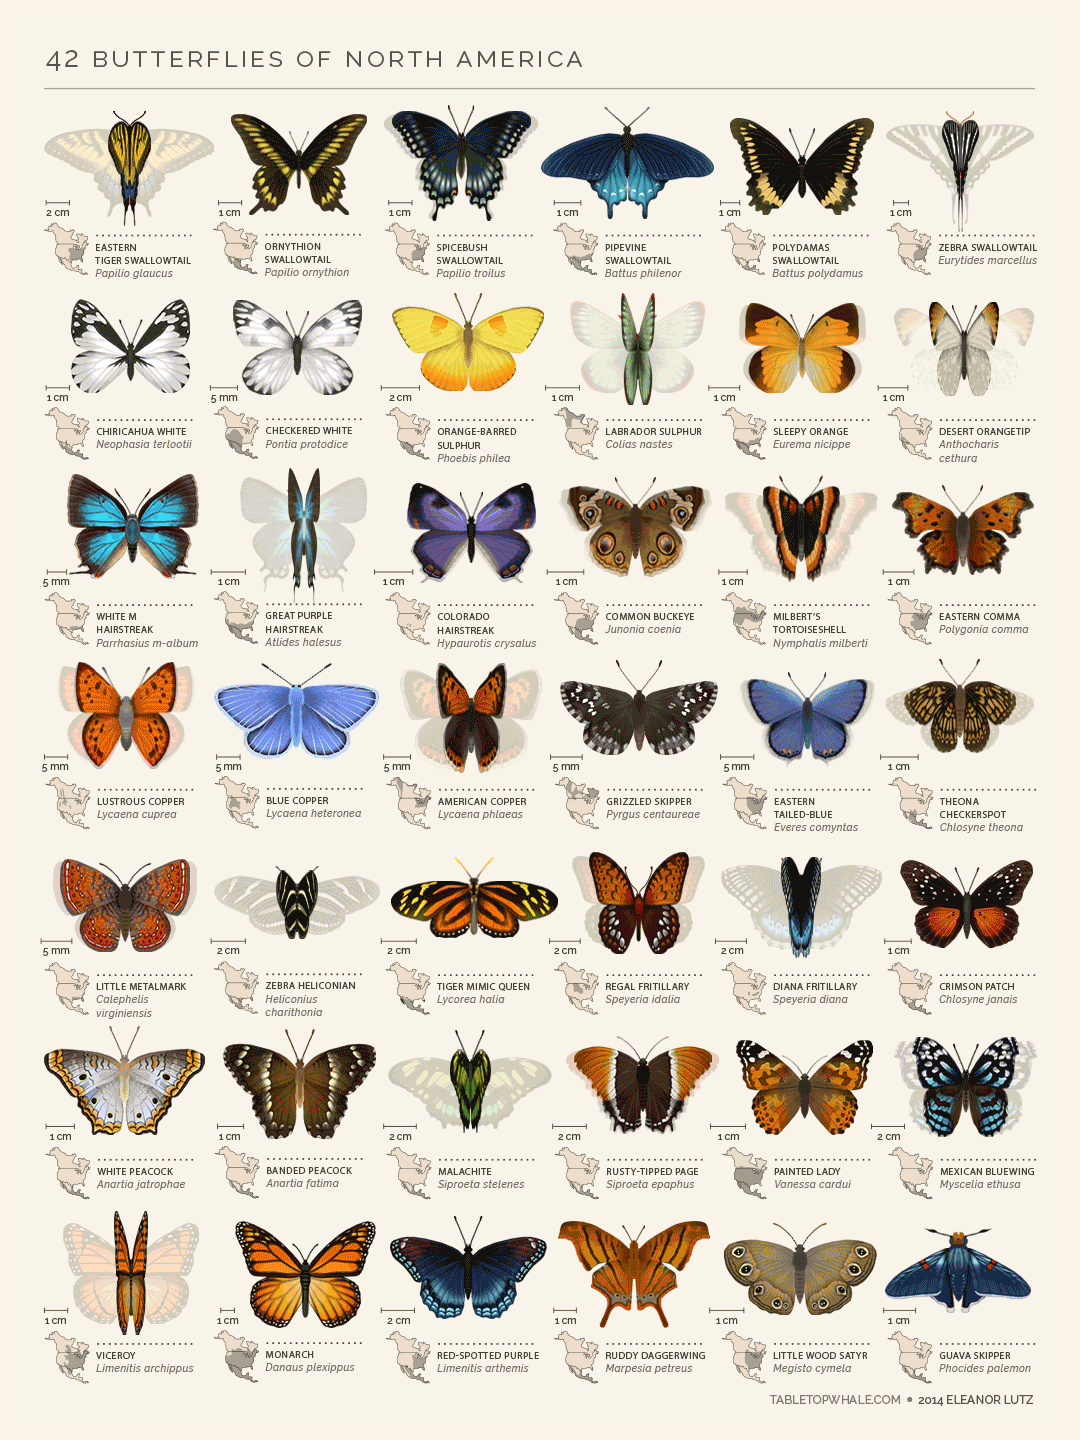 An animated chart of 42 North American butterflies by TabletopWhale // Eleanor Lutz 